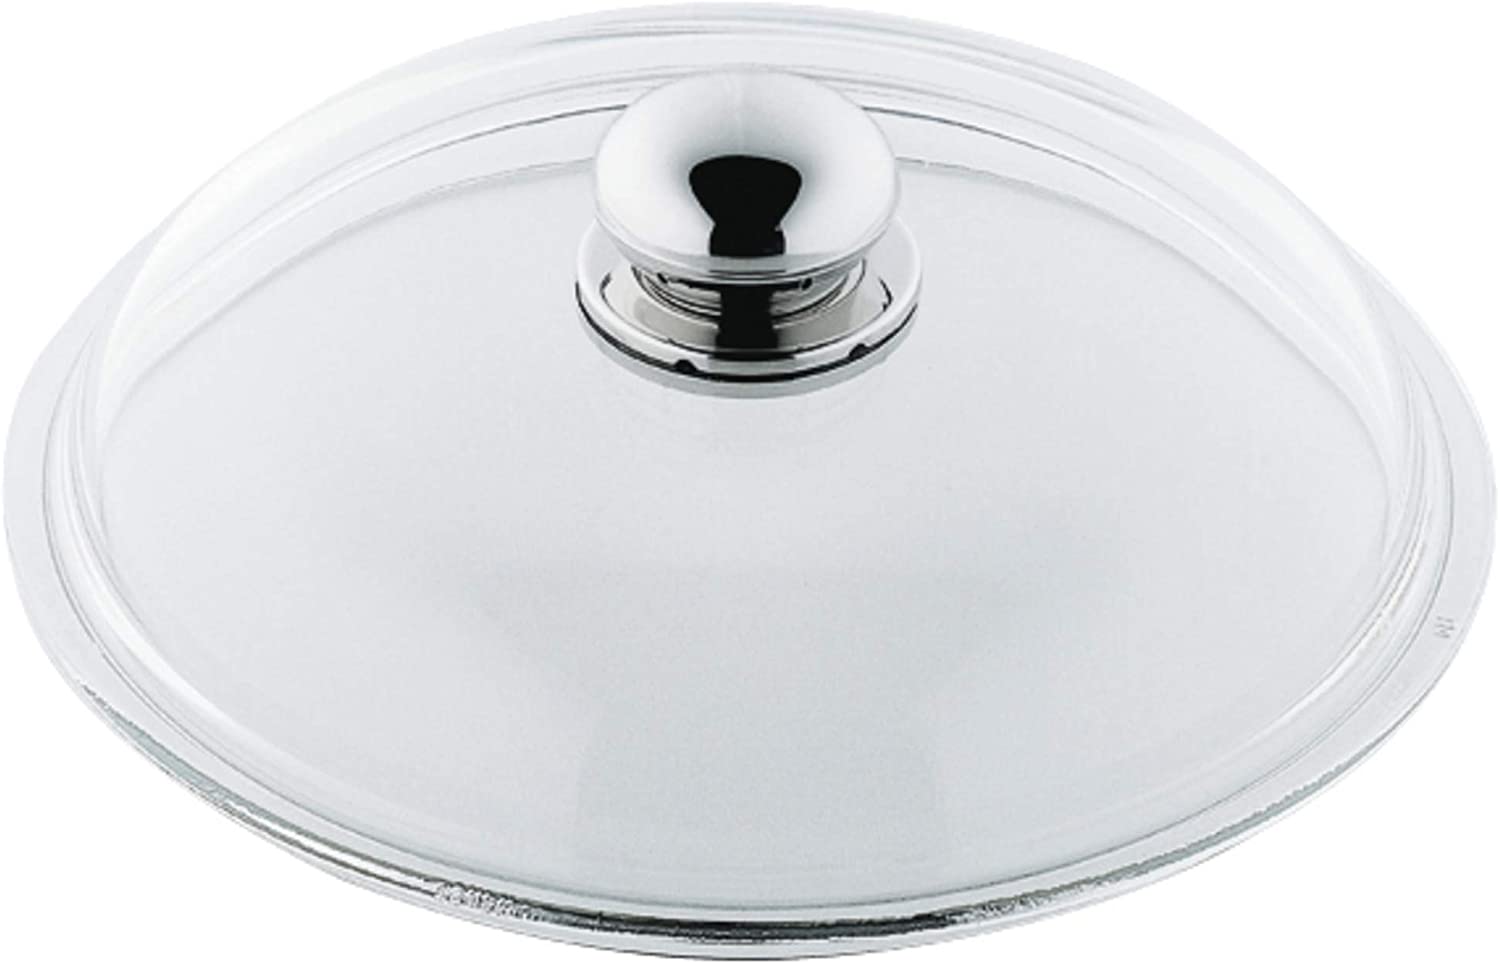 Silit Pan lid 32 cm, glass lid with metal knob, lid for pots and pans, heat-resistant glass, dishwasher safe